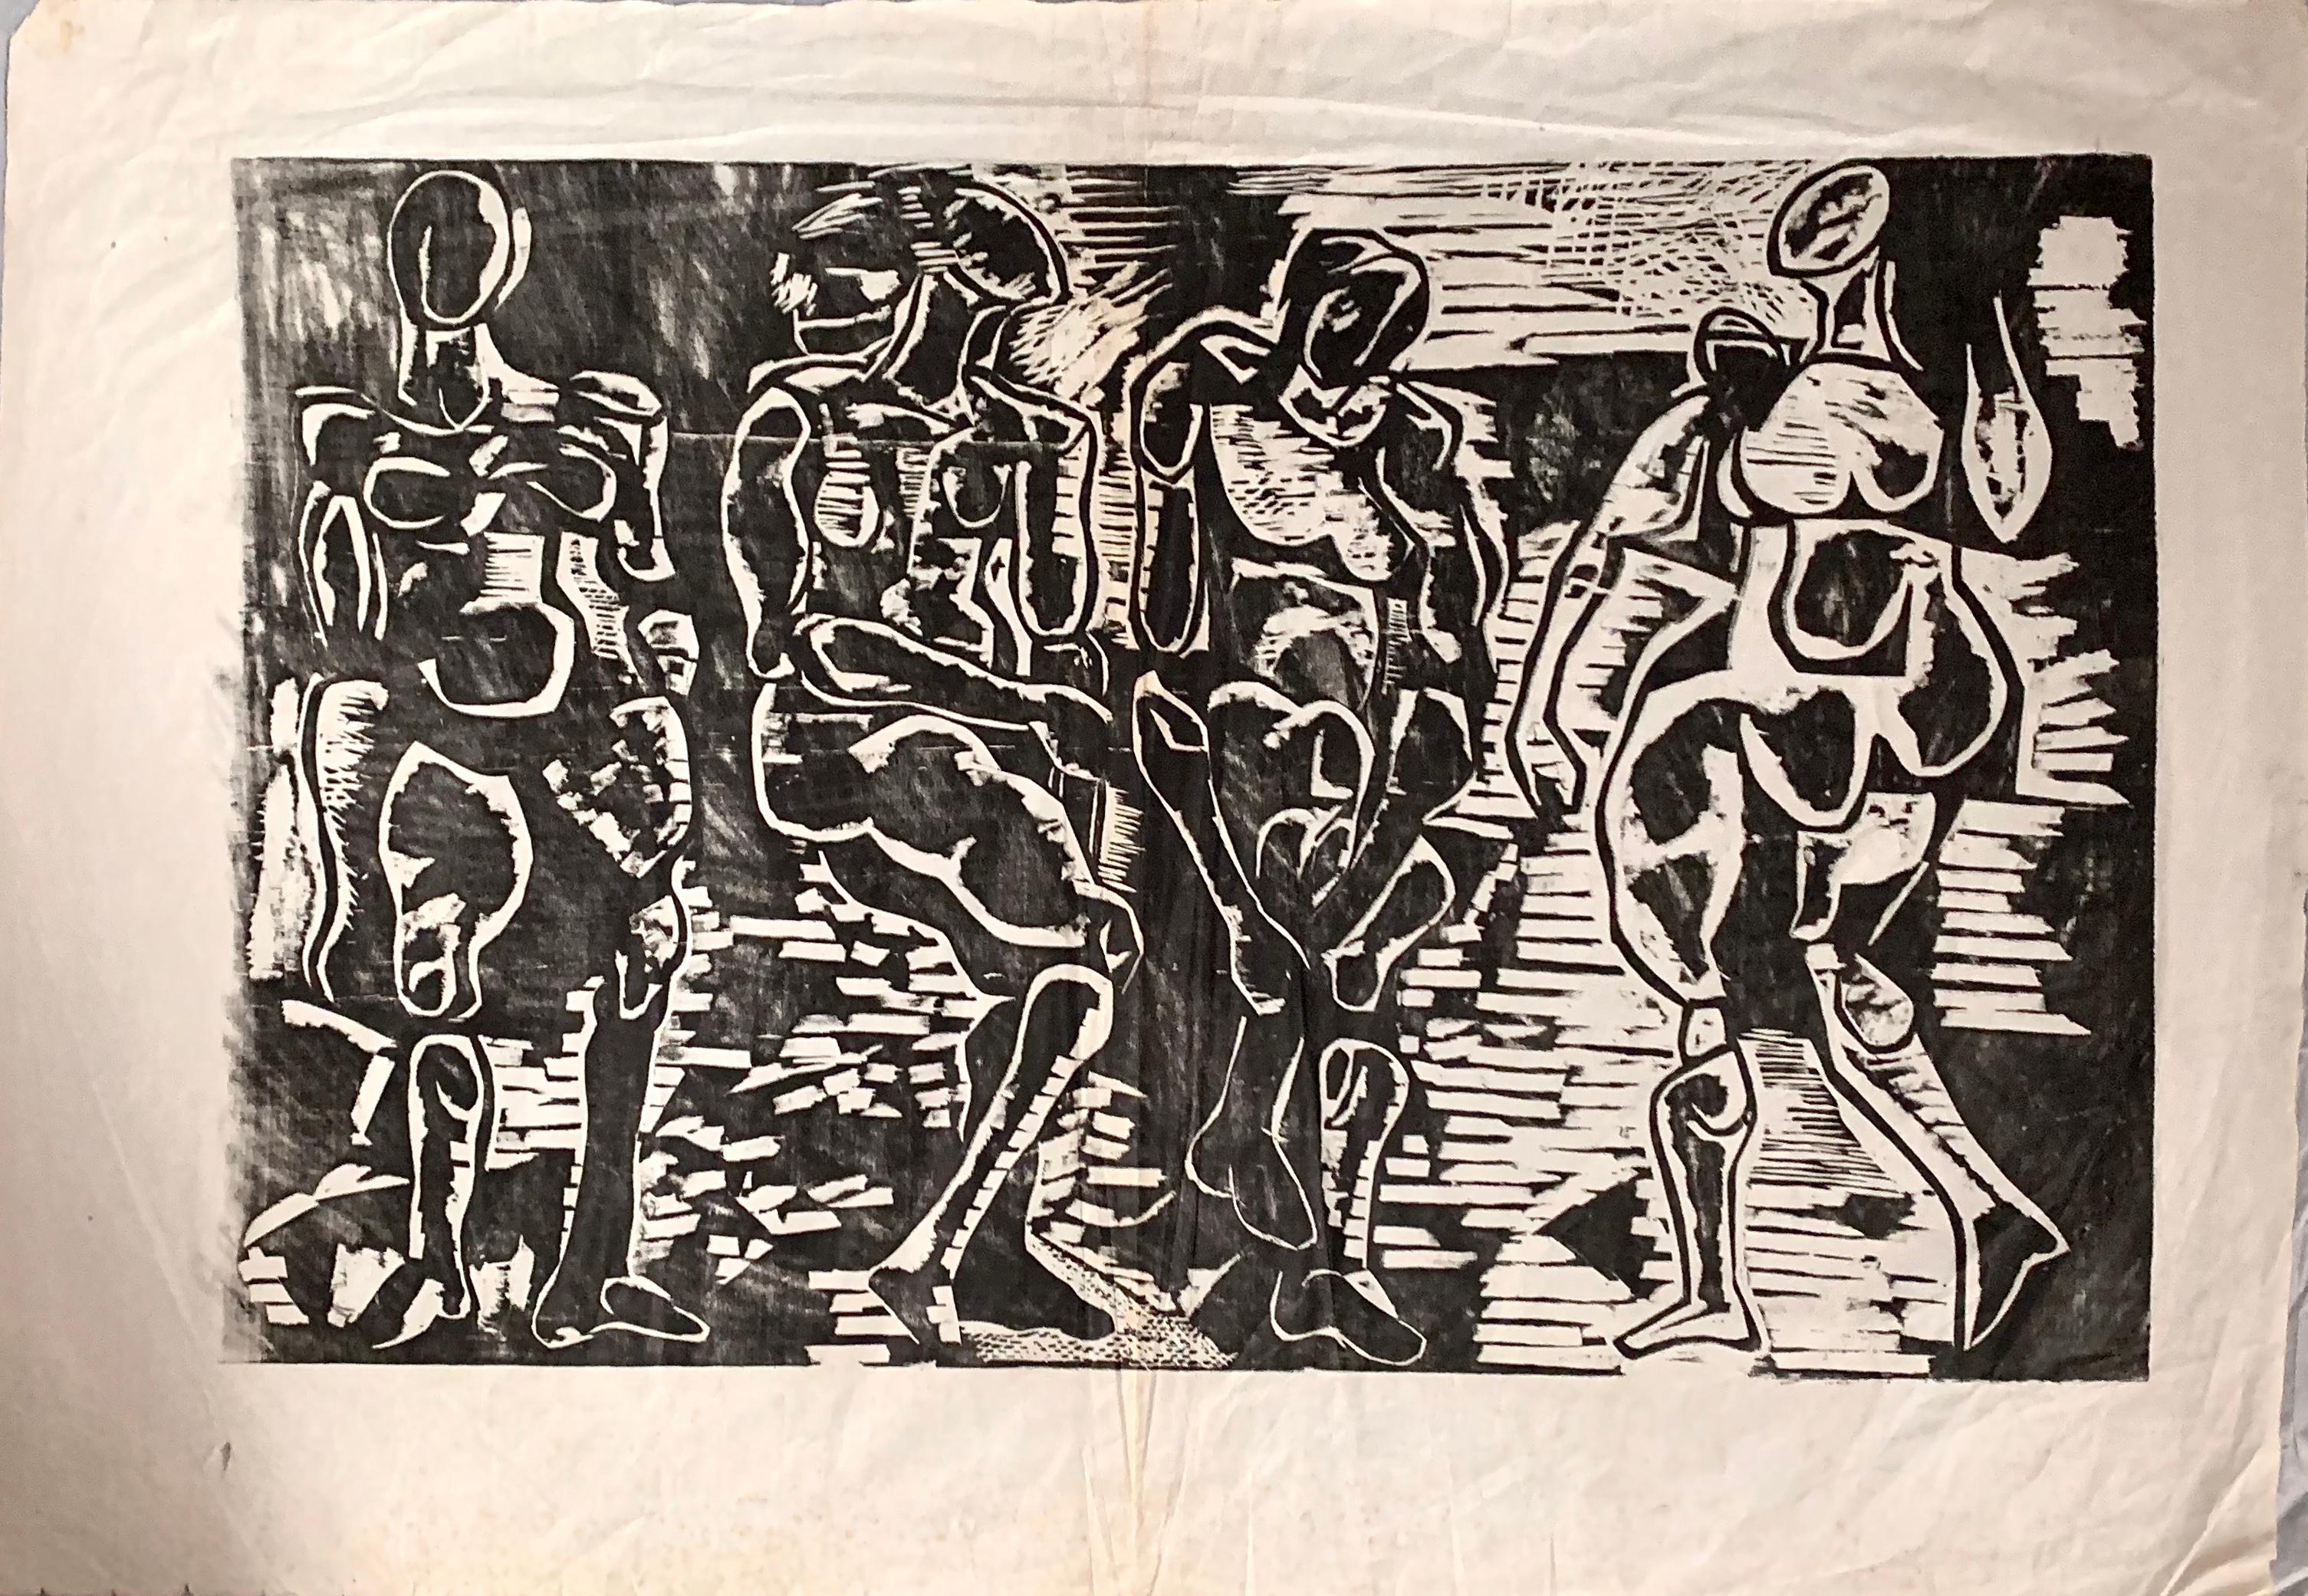 1950s abstract Expressionism Woodblock print on handmade paper

Gorgeous, graphic early work from Grippi. Experimentation with woodblock printing on handmade paper, inspired by the Japanese tradition and the 'primitivism' 'tribal' aesthetic that